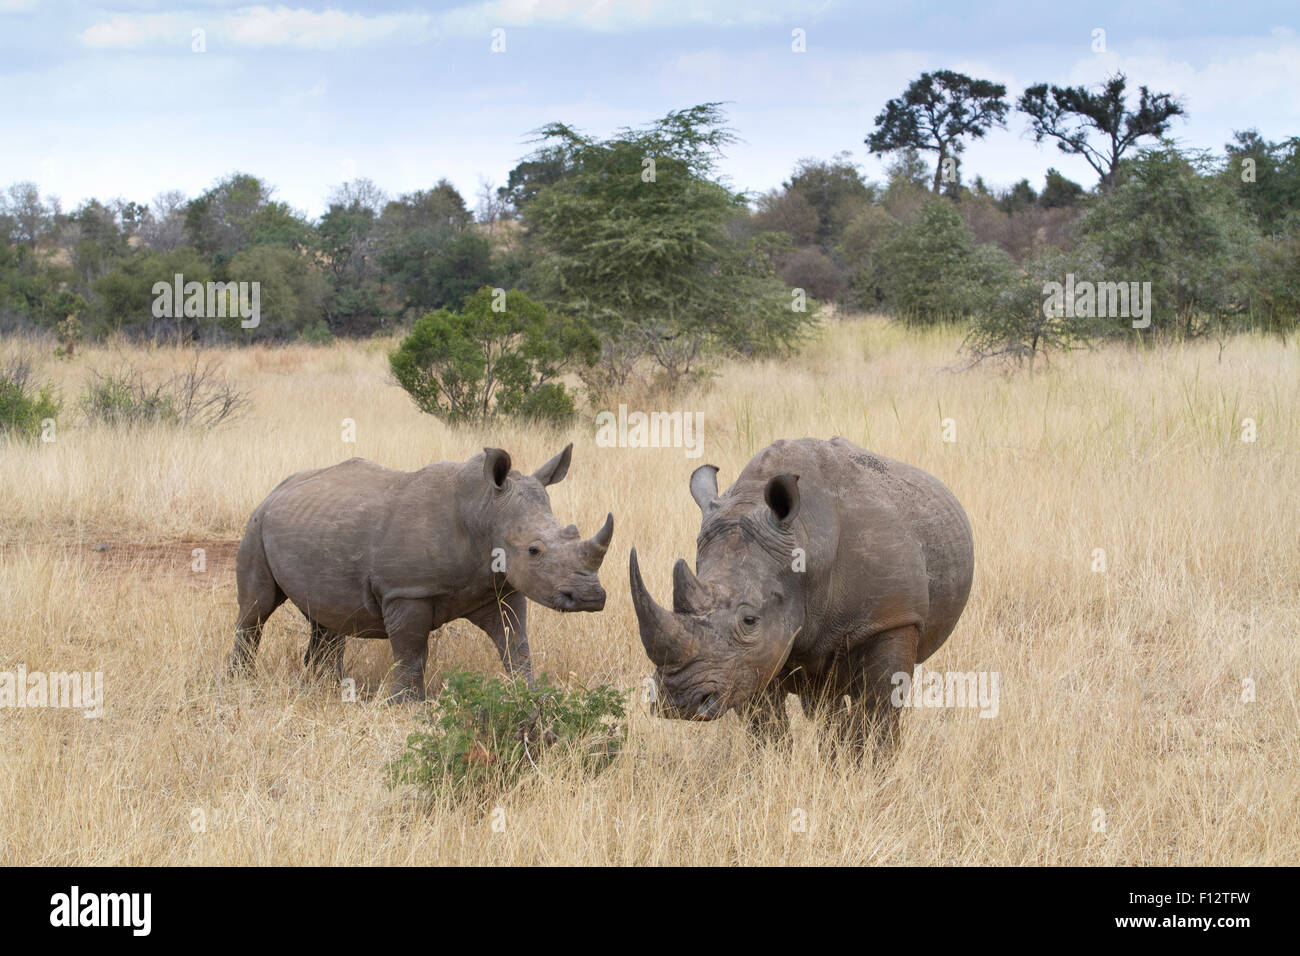 White Rhinos in Kruger National Park, Limpopo Province, South Africa, savanah grasslands Stock Photo